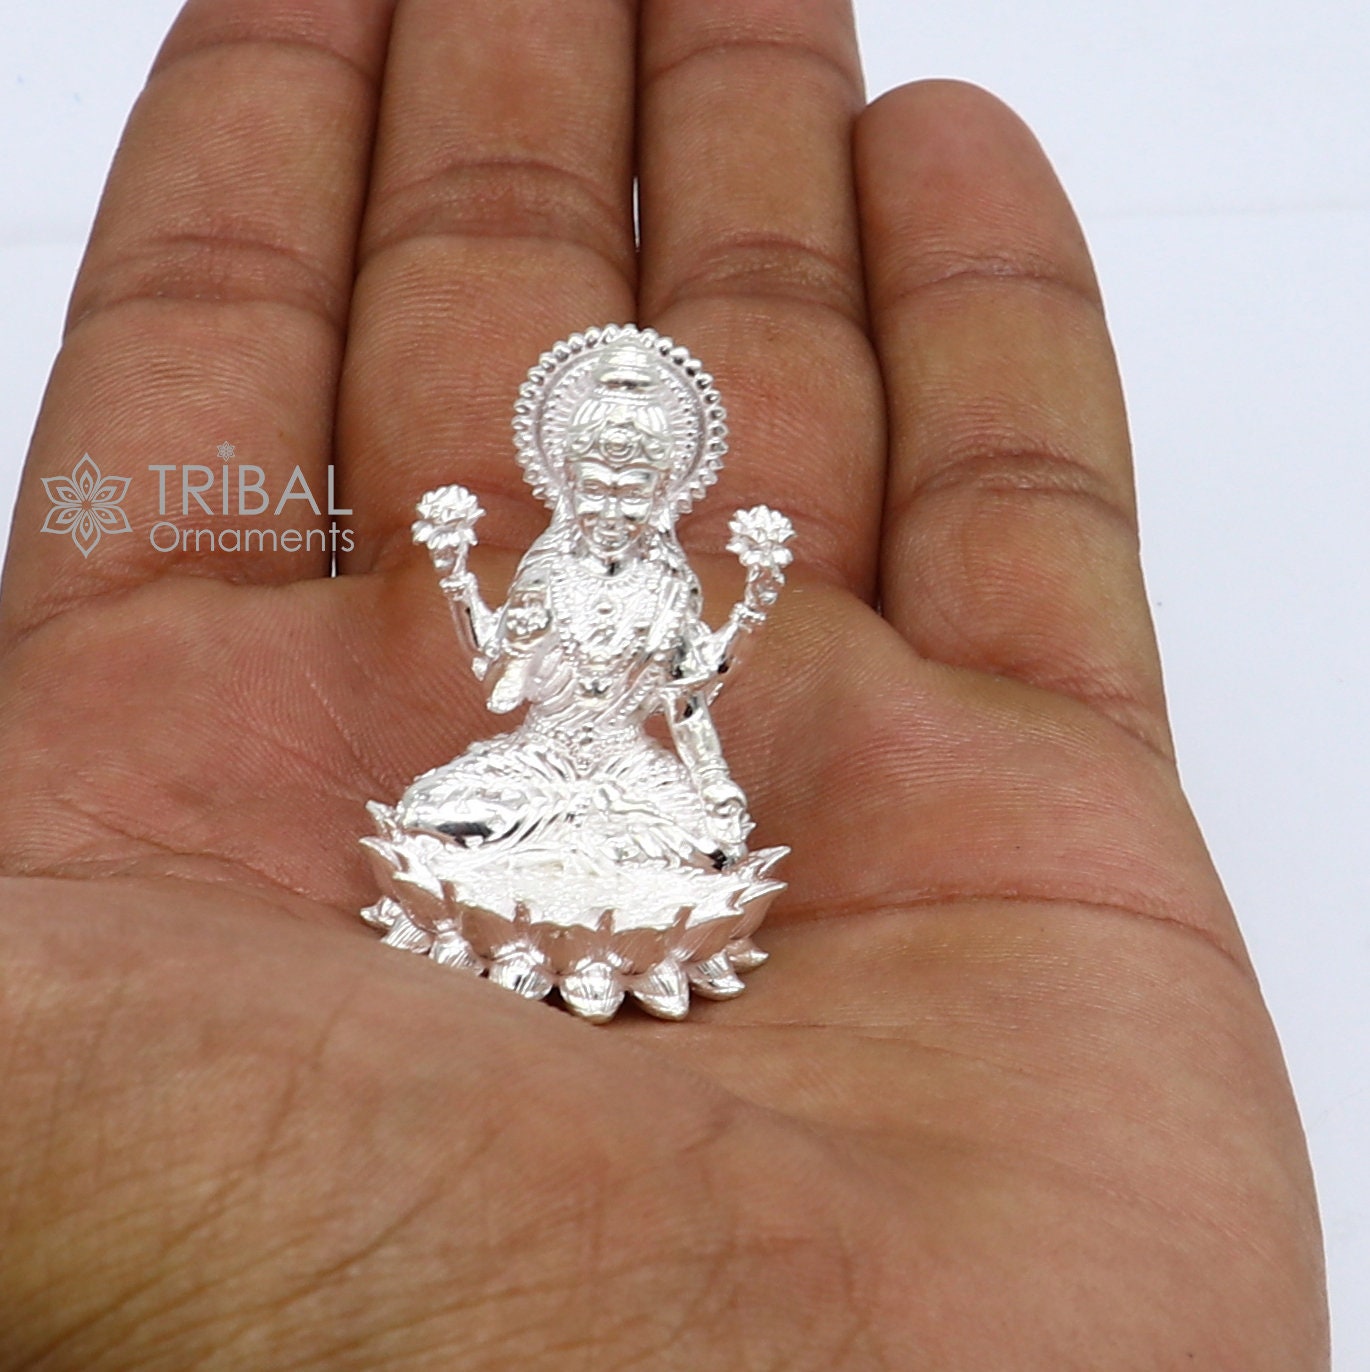 1.5" 925 Sterling silver Lakshmi and Ganesha statue, puja article figurine, Diwali puja brings joy, hope, and wealth to the owners art746 - TRIBAL ORNAMENTS